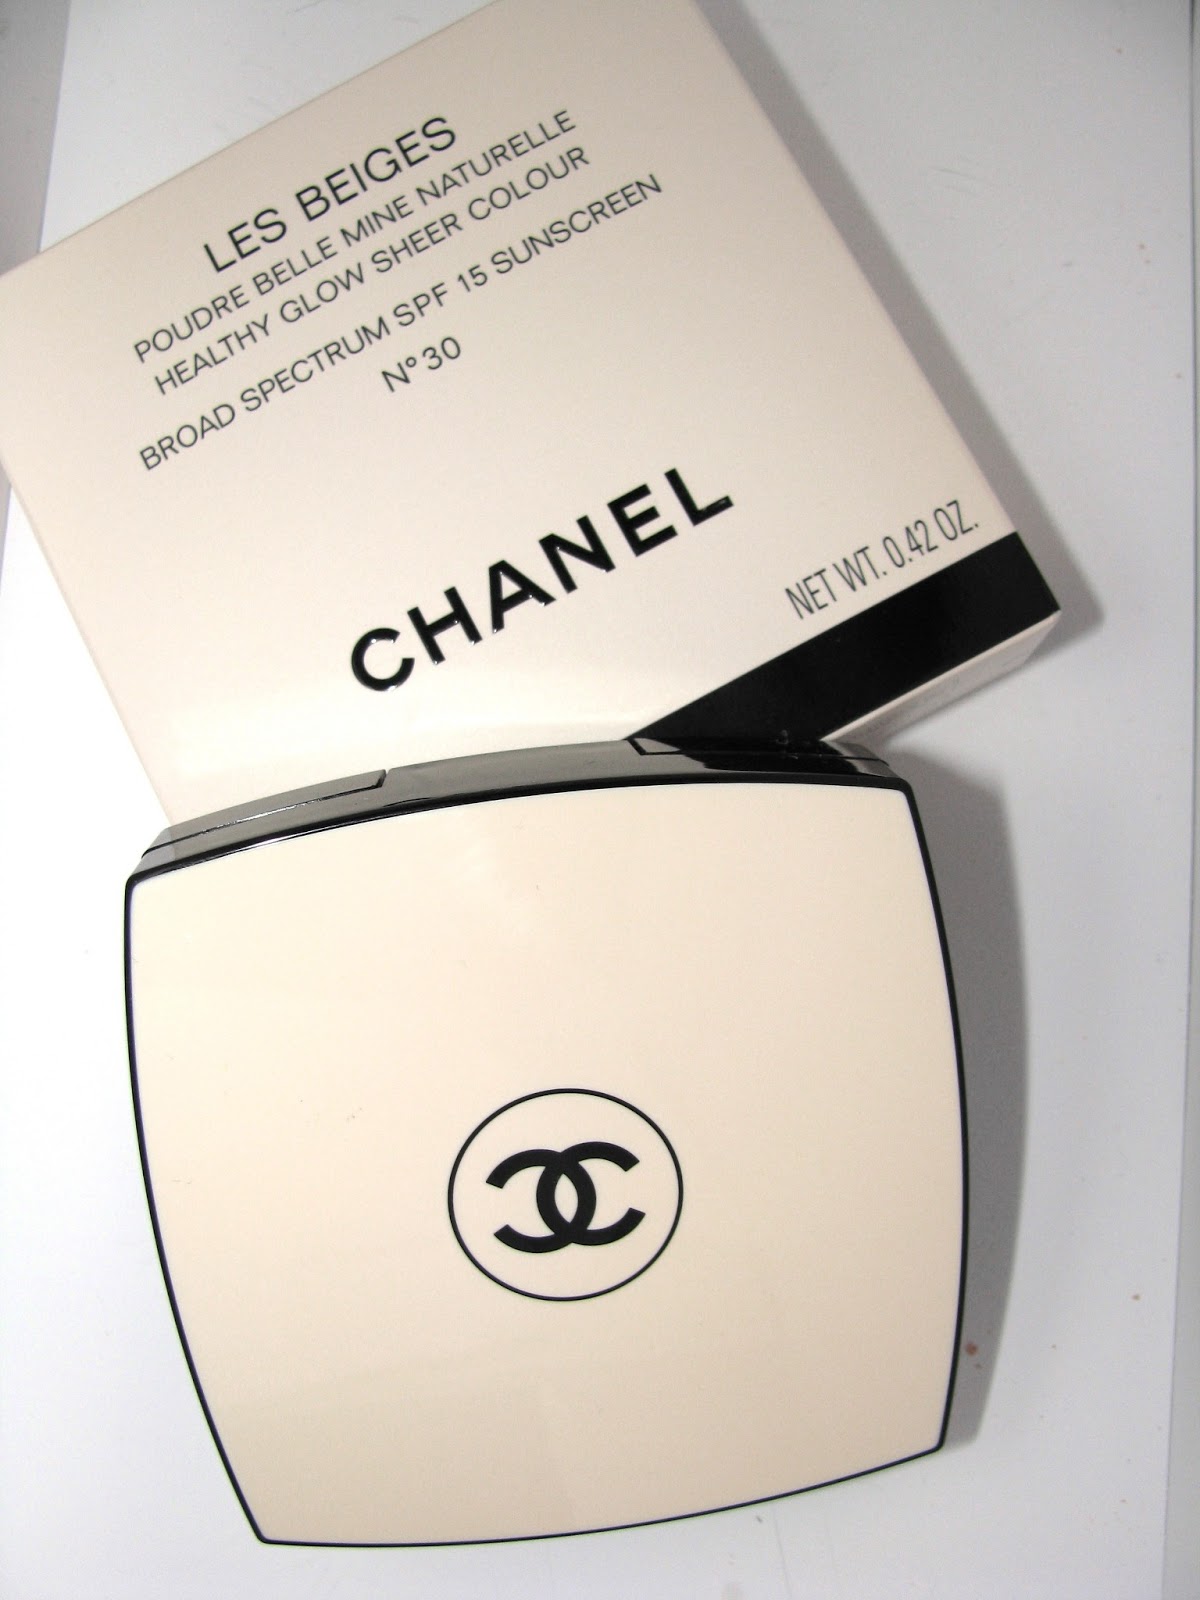 chanel les beiges healthy glow sheer powder swatches